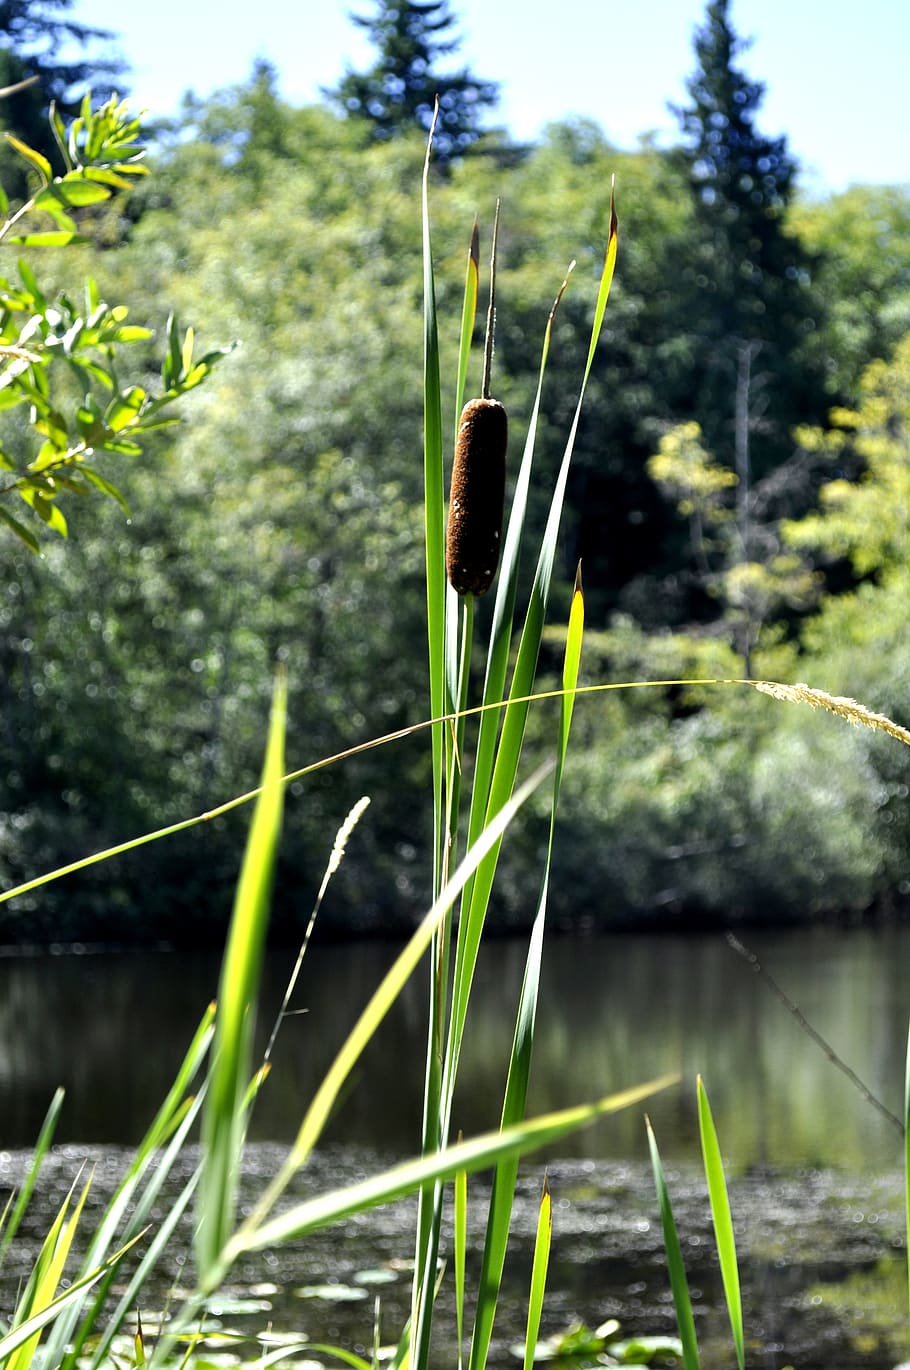 cat tail, swamp, cat-tail, pond, summer, outdoor, park, cattail, water, grass